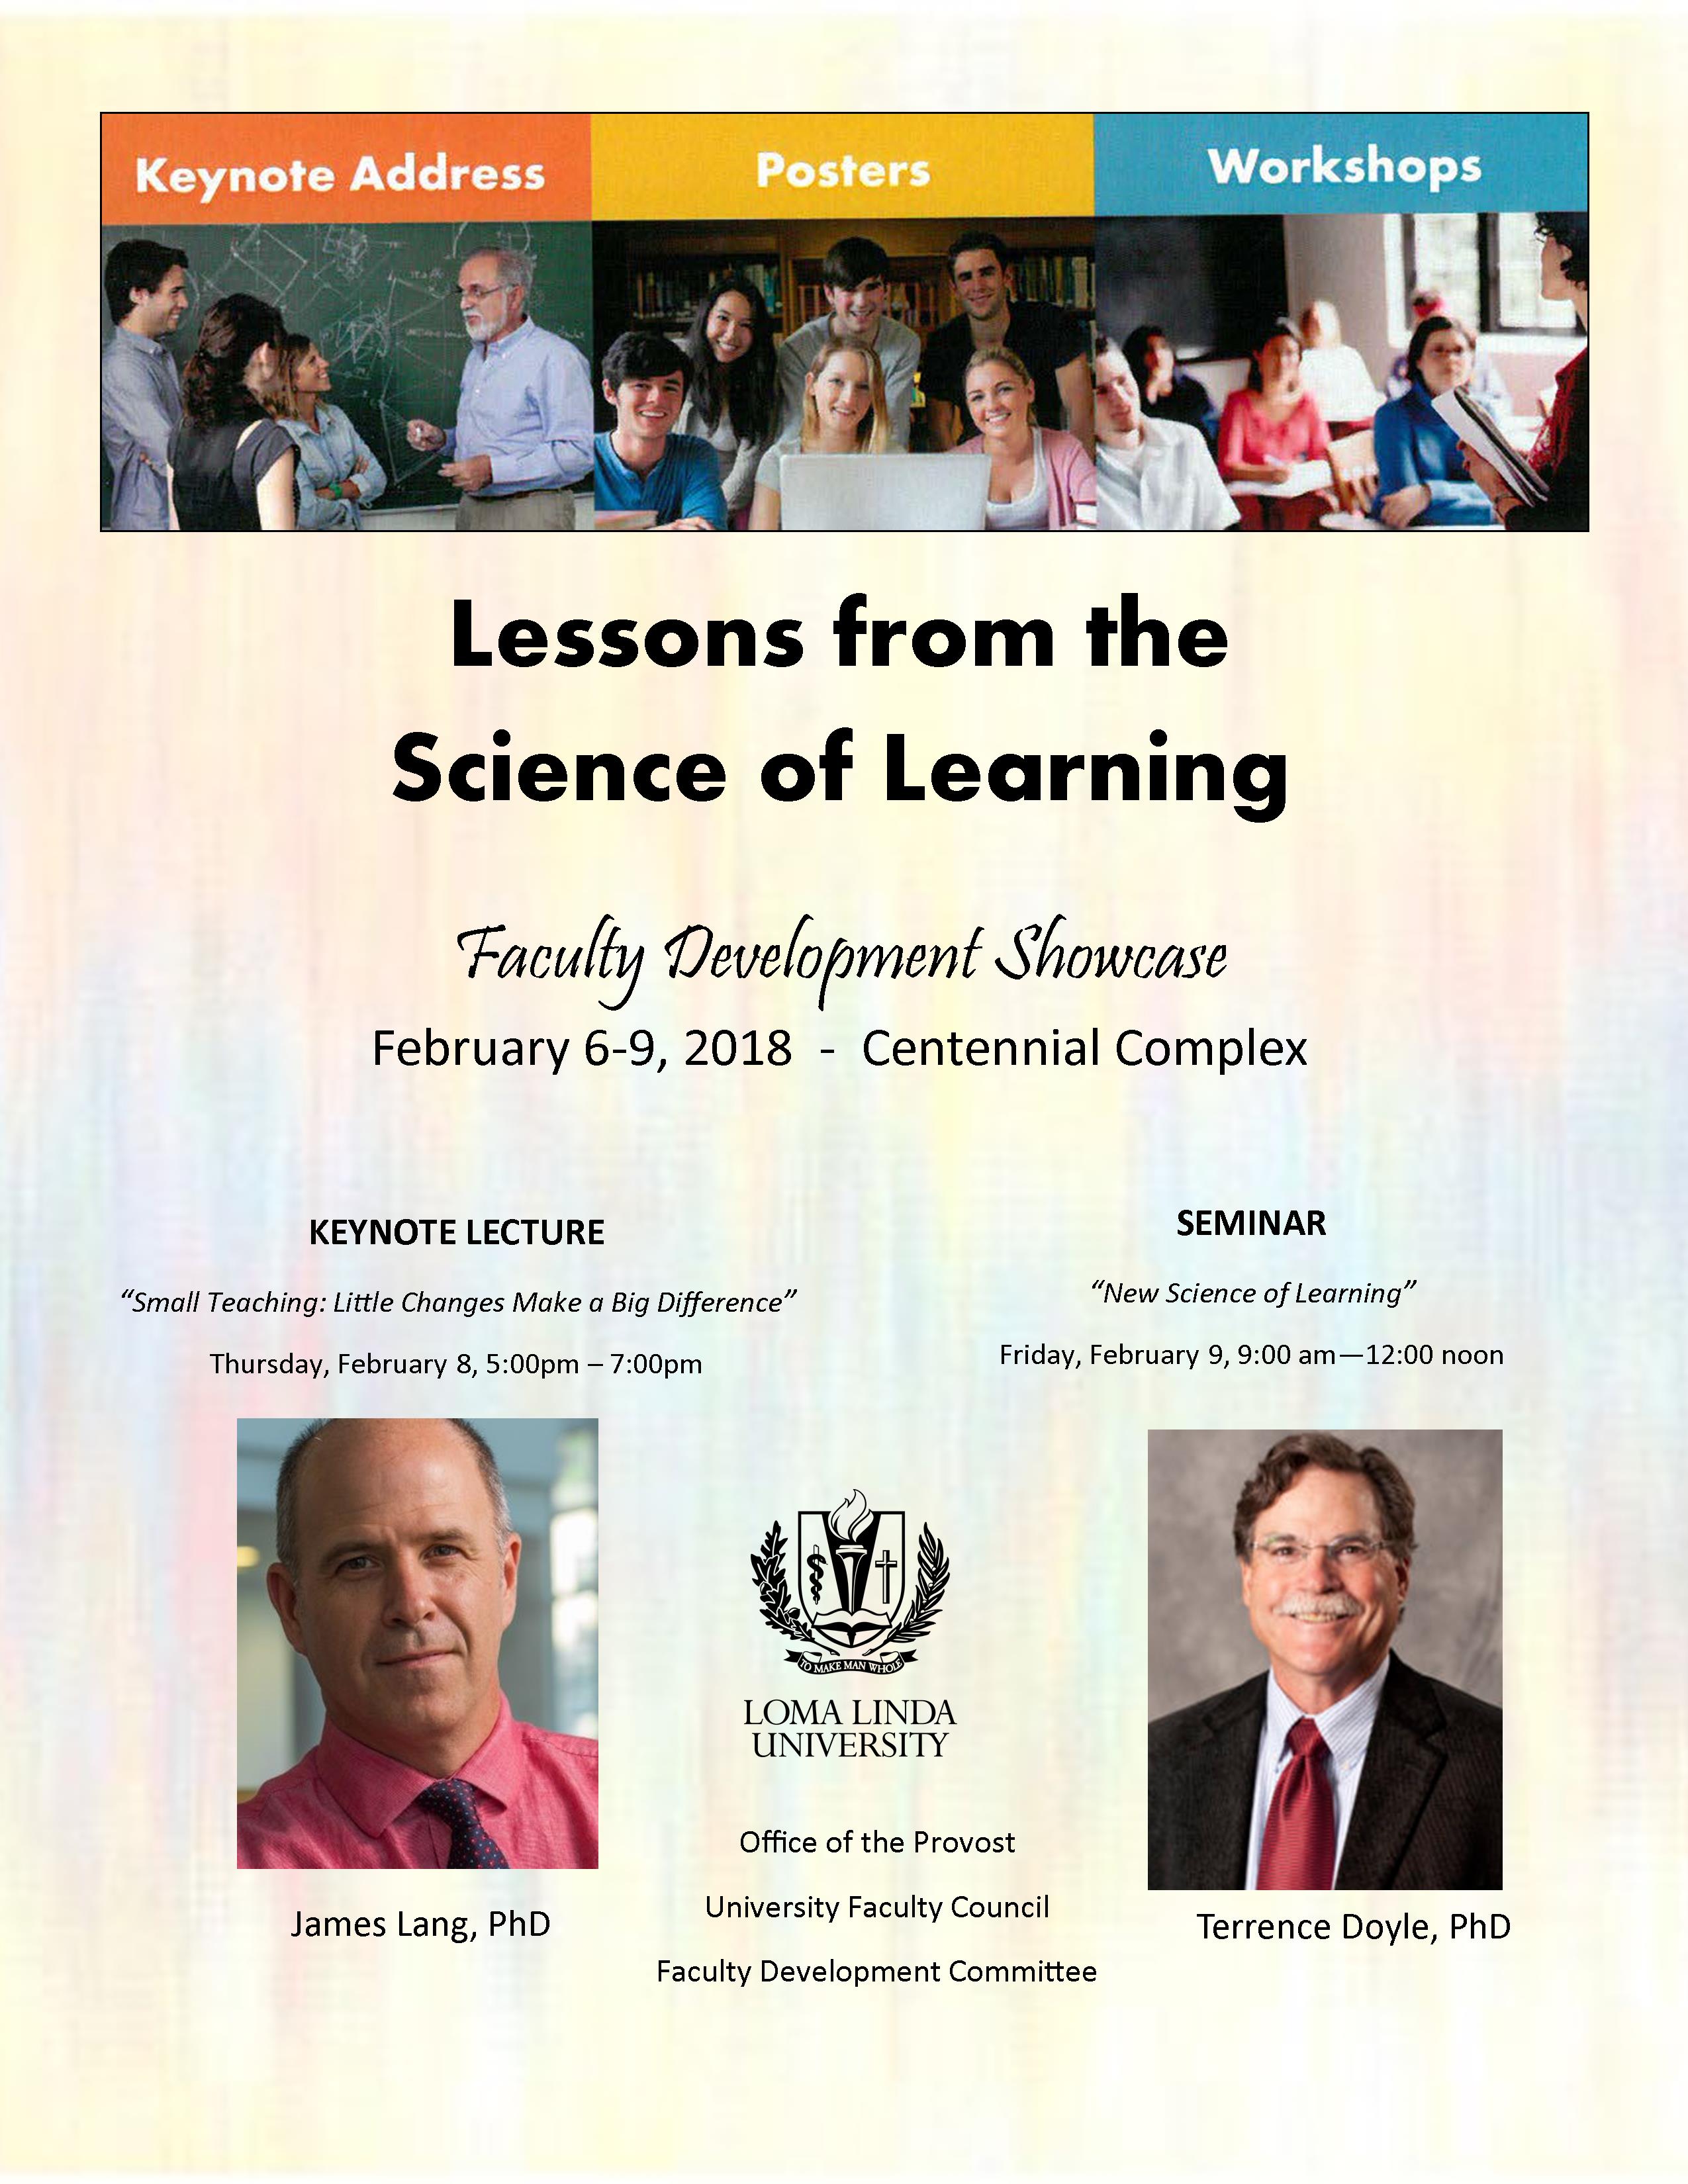 Lessons from the Science of Learning brochure cover